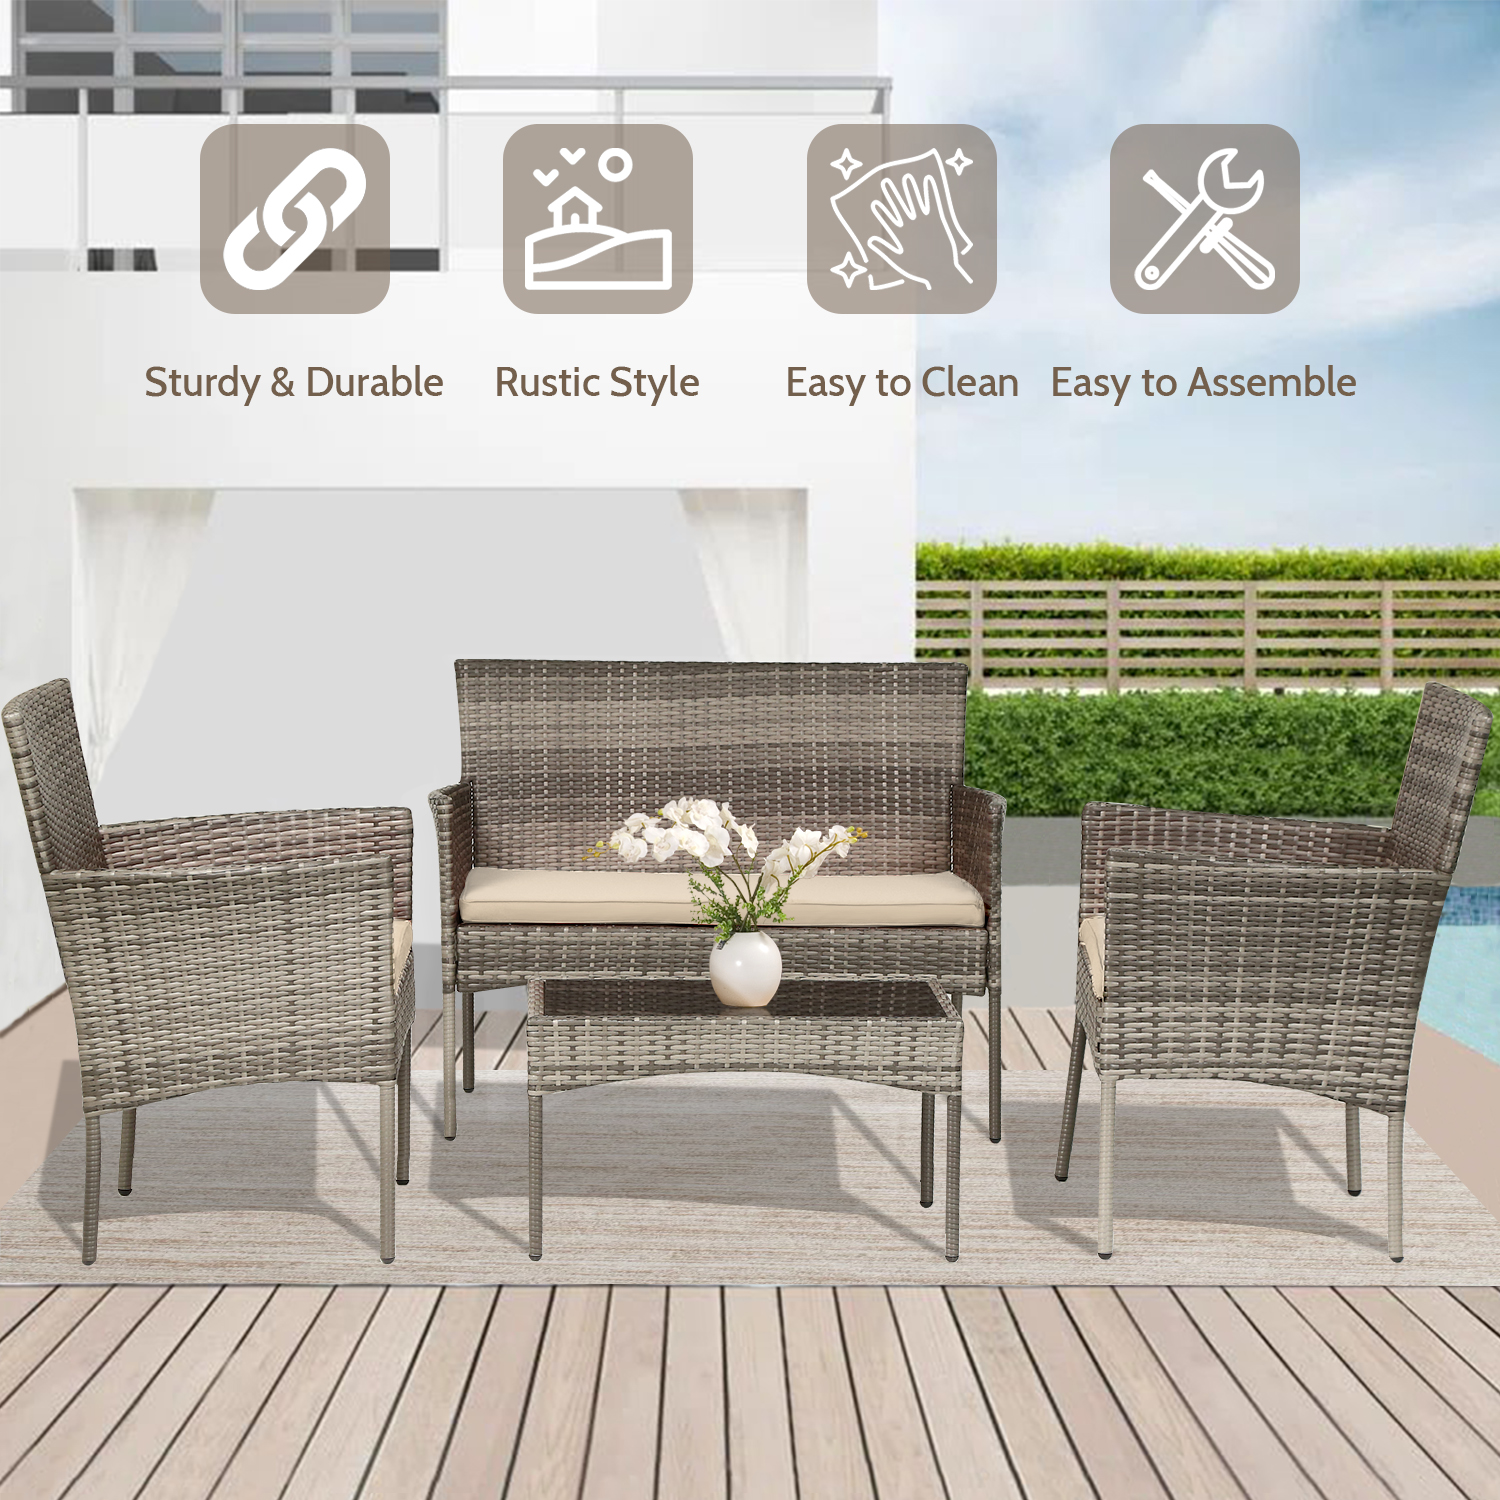 Patio Conversation Set 4 Pieces Patio Furniture Set Wicker with Rattan Chair Loveseats Coffee Table for Outdoor Indoor Garden Backyard Porch Poolside Balcony,Gray Wicker/Khaki Cushions - image 5 of 7